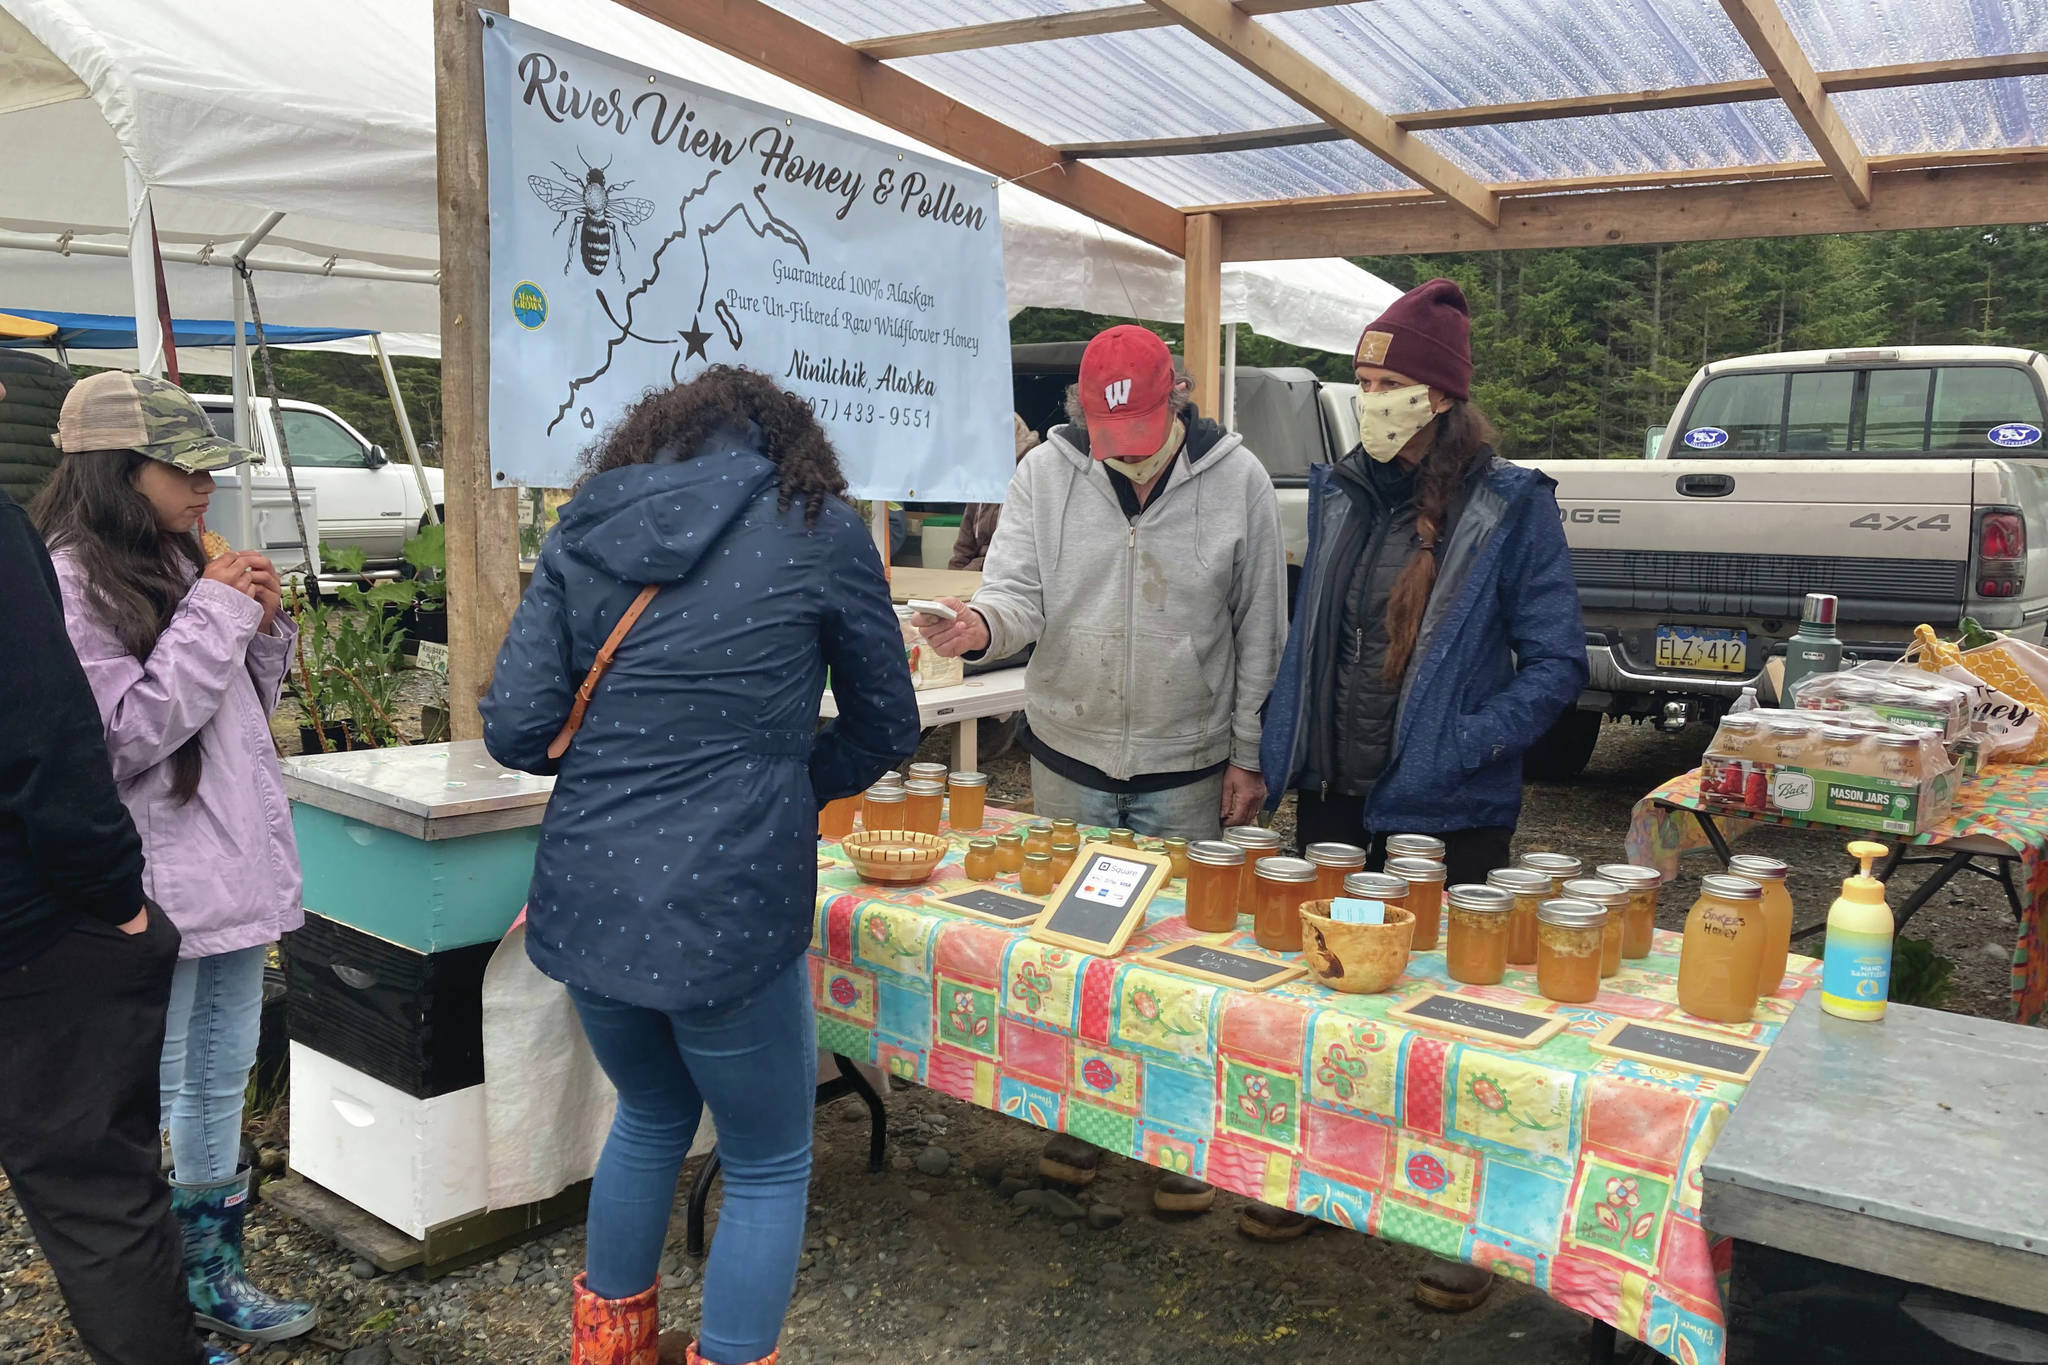 Photo by Sarah Knapp/Homer News
A woman purchases honey at the Homer Farmers Market on Saturday, May 29 in Homer.